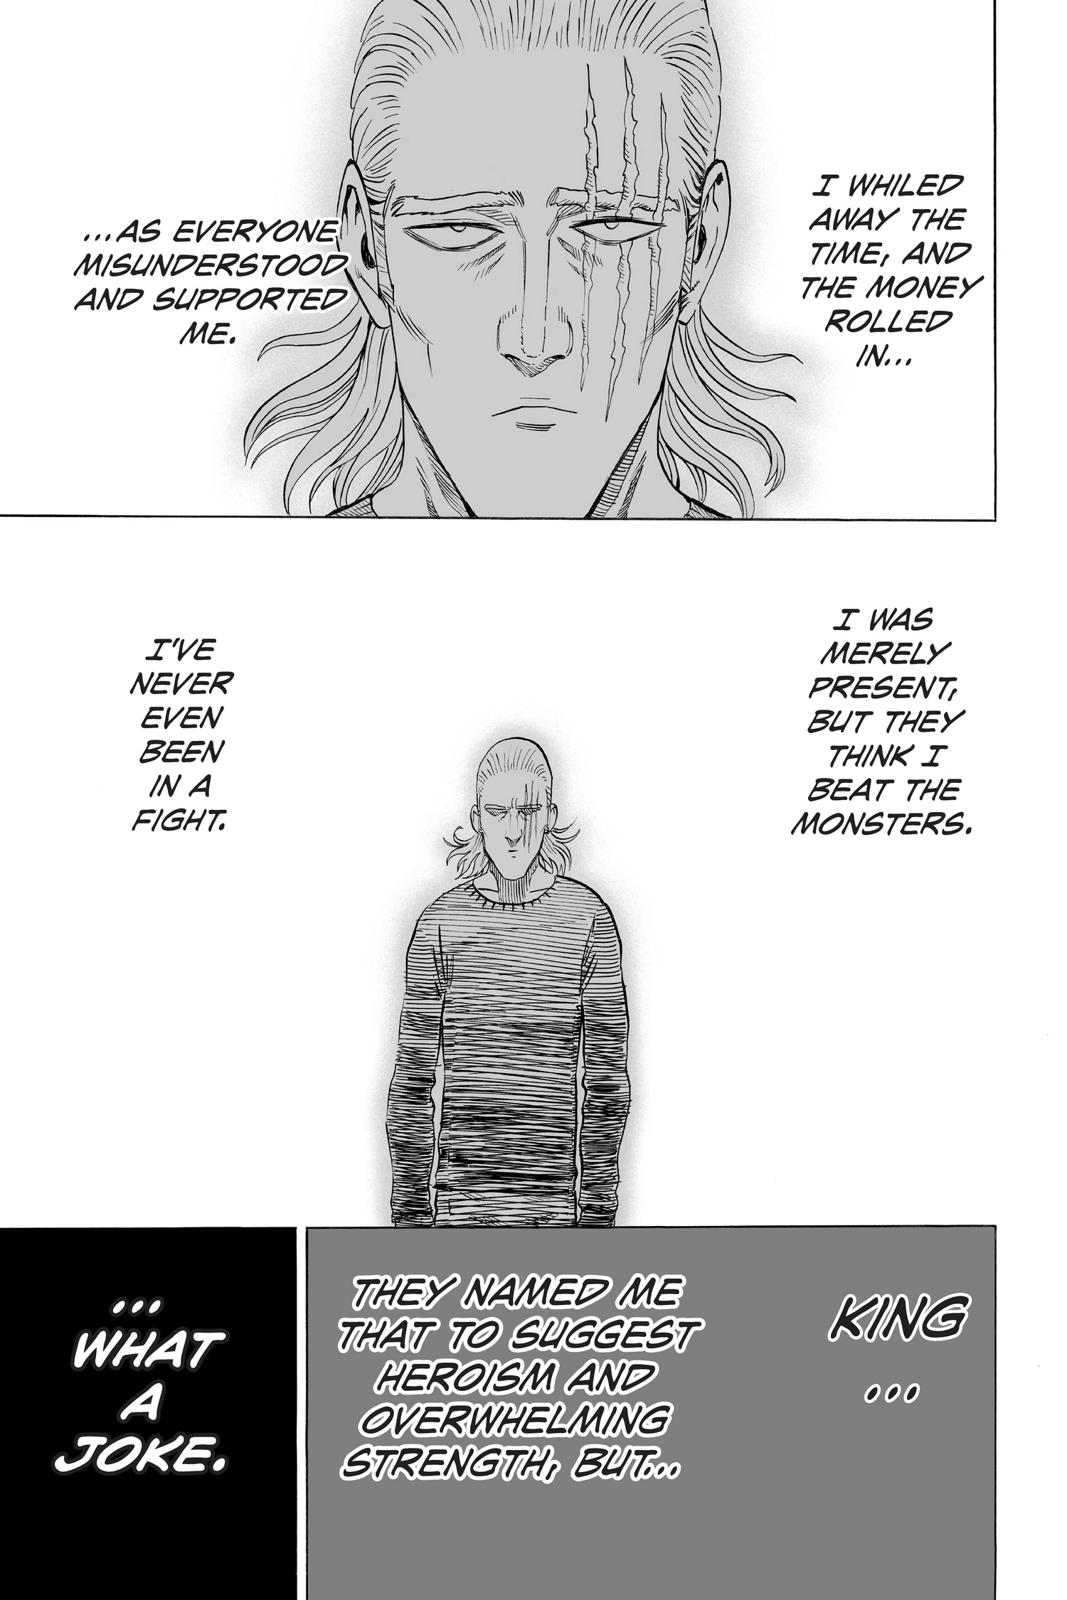 One-Punch Man, Punch 39 image 05